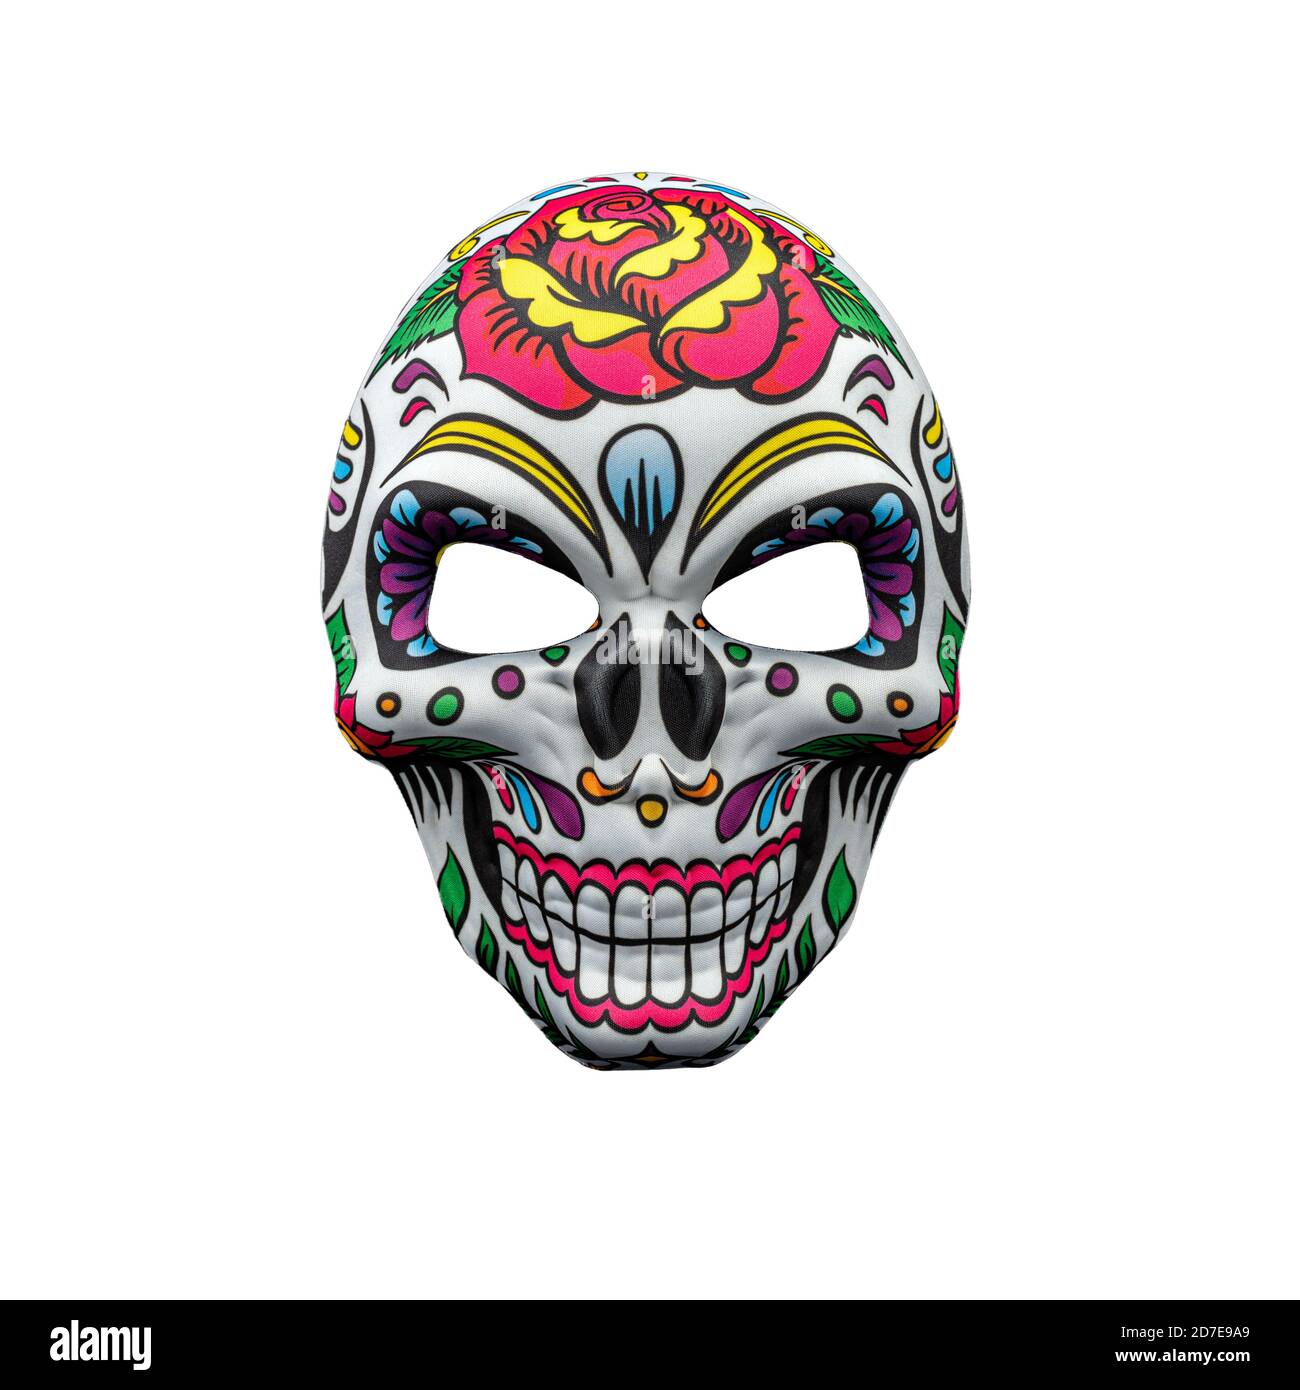 Halloween mask representing a traditional mexican skull with colorful floral pattern isolated on a white background. Stock Photo